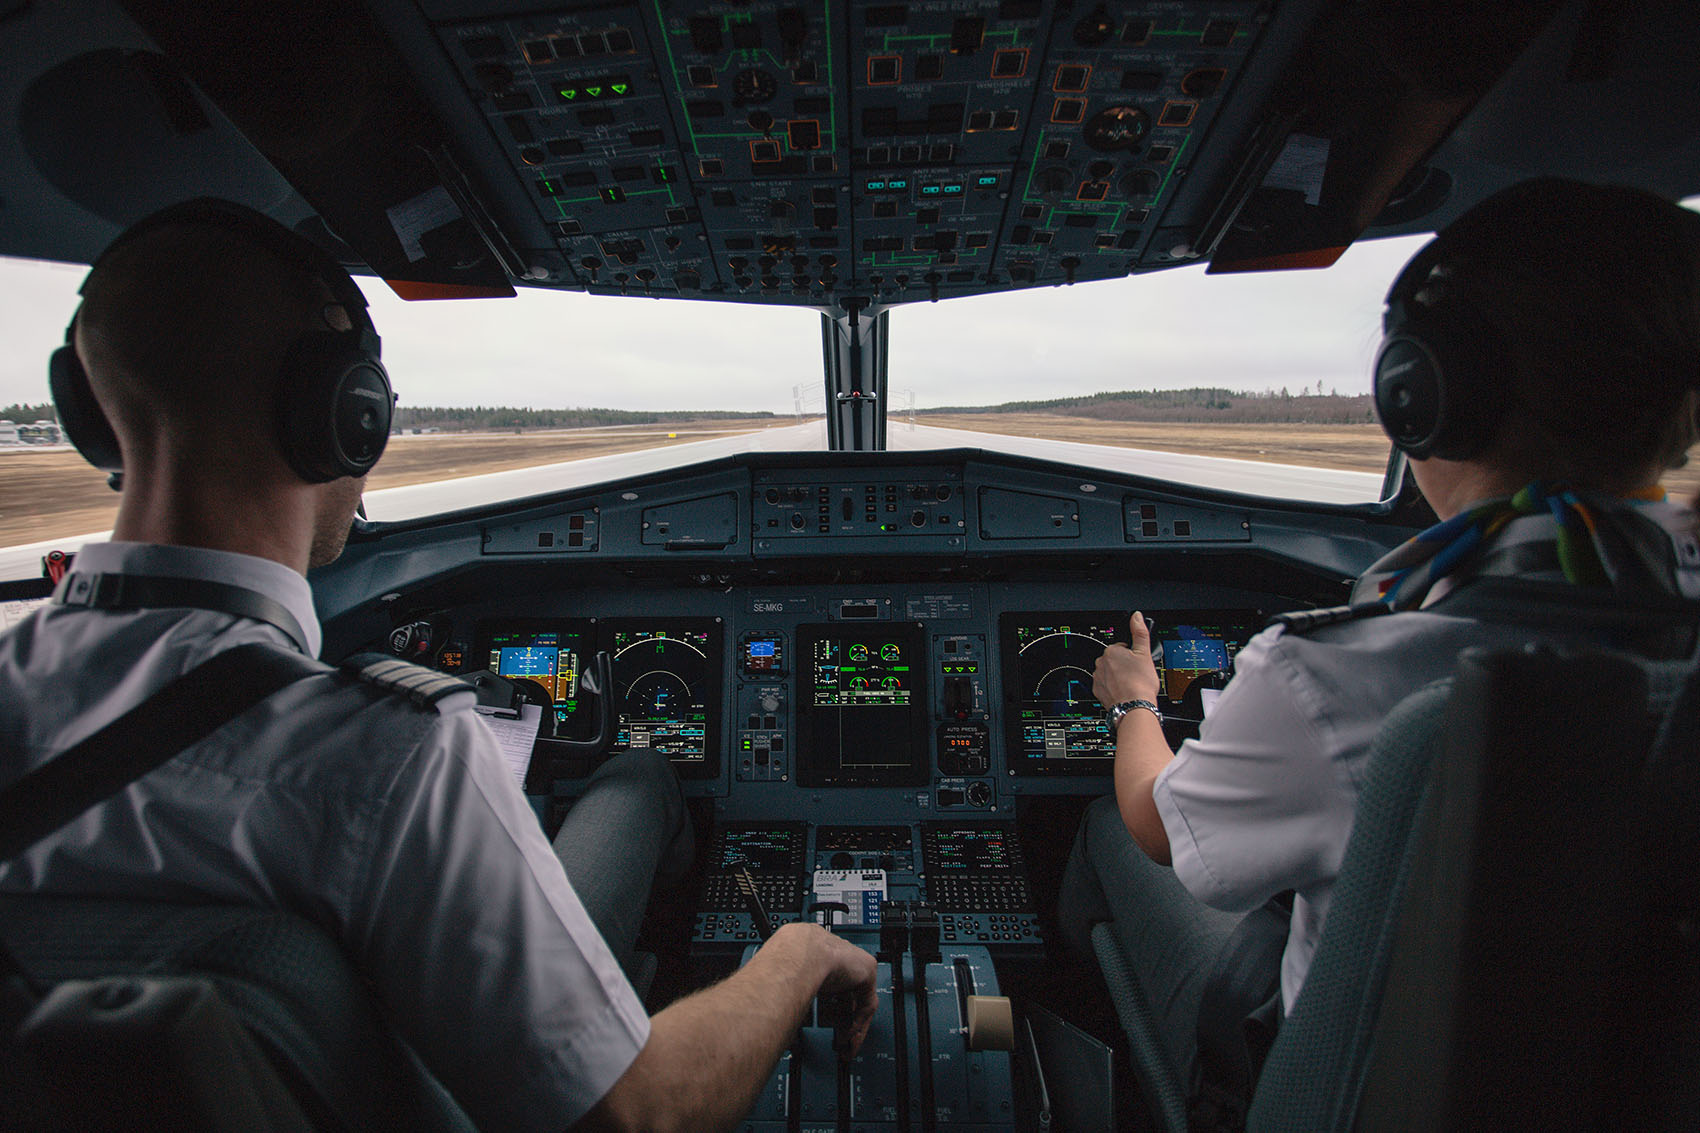 A Day in the Life: What is a Pilot's Schedule Really Like?